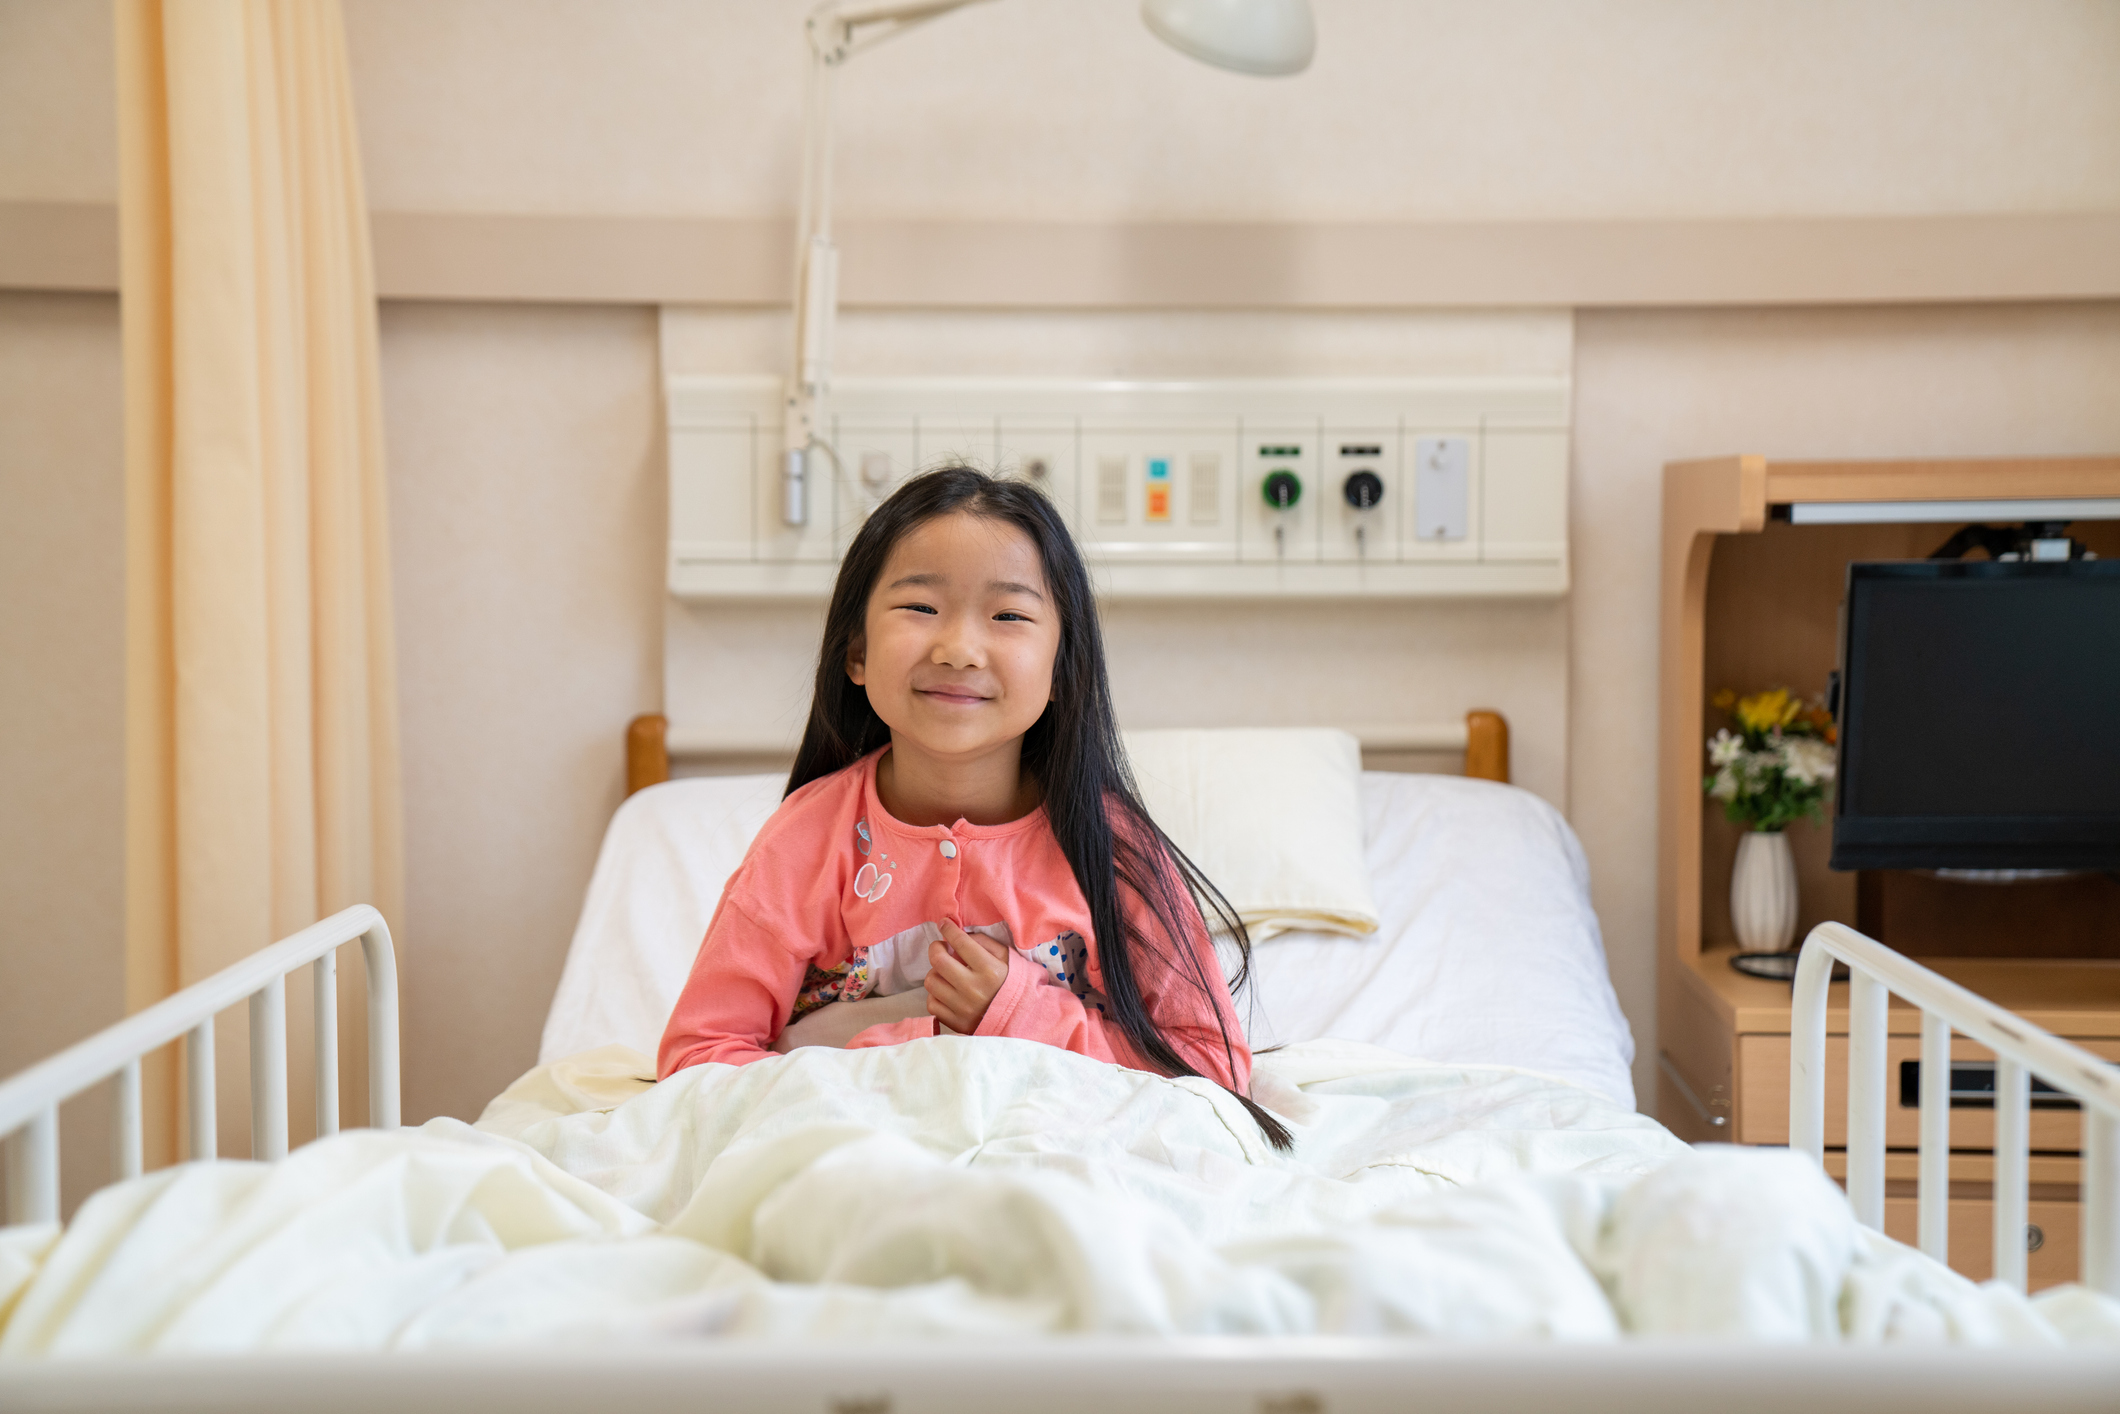 Young girl in hospital bed